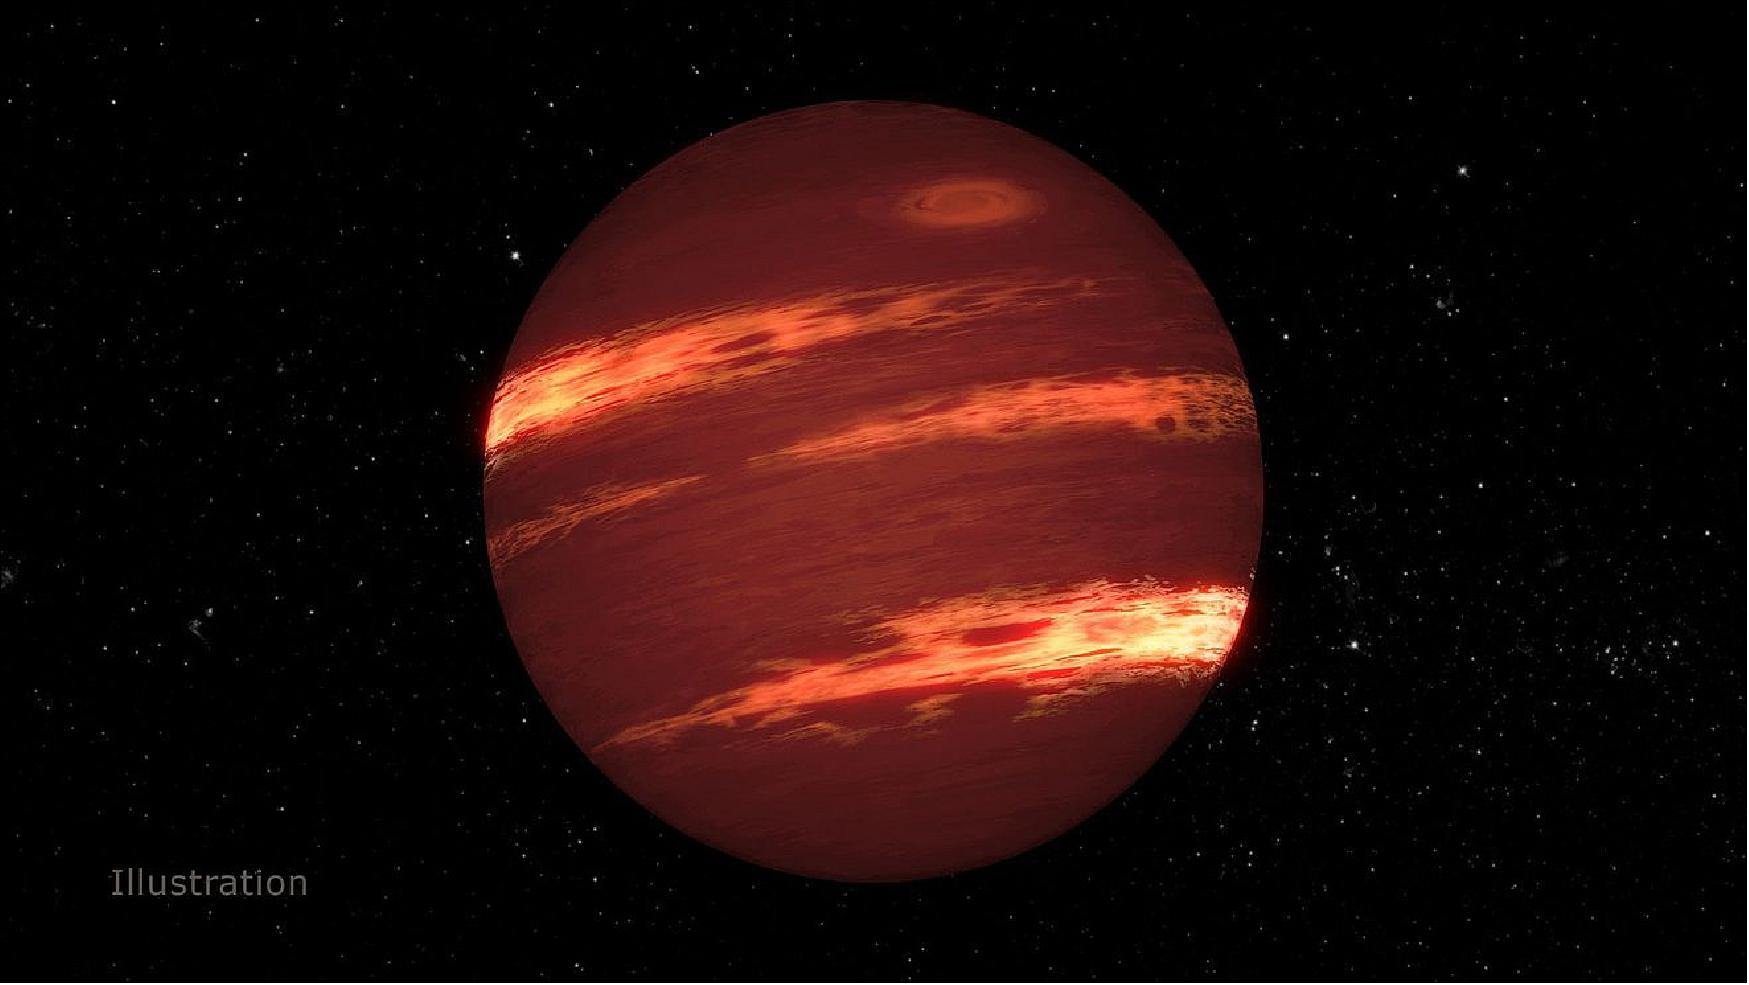 Figure 8: This illustration shows what clouds might look like in the atmosphere of a brown dwarf. Using NASA's retired Spitzer Space Telescope, scientists were able to detect clouds and other weather features in brown dwarf atmospheres (image credit: NASA/JPL-Caltech/IPAC/T. Pyle)